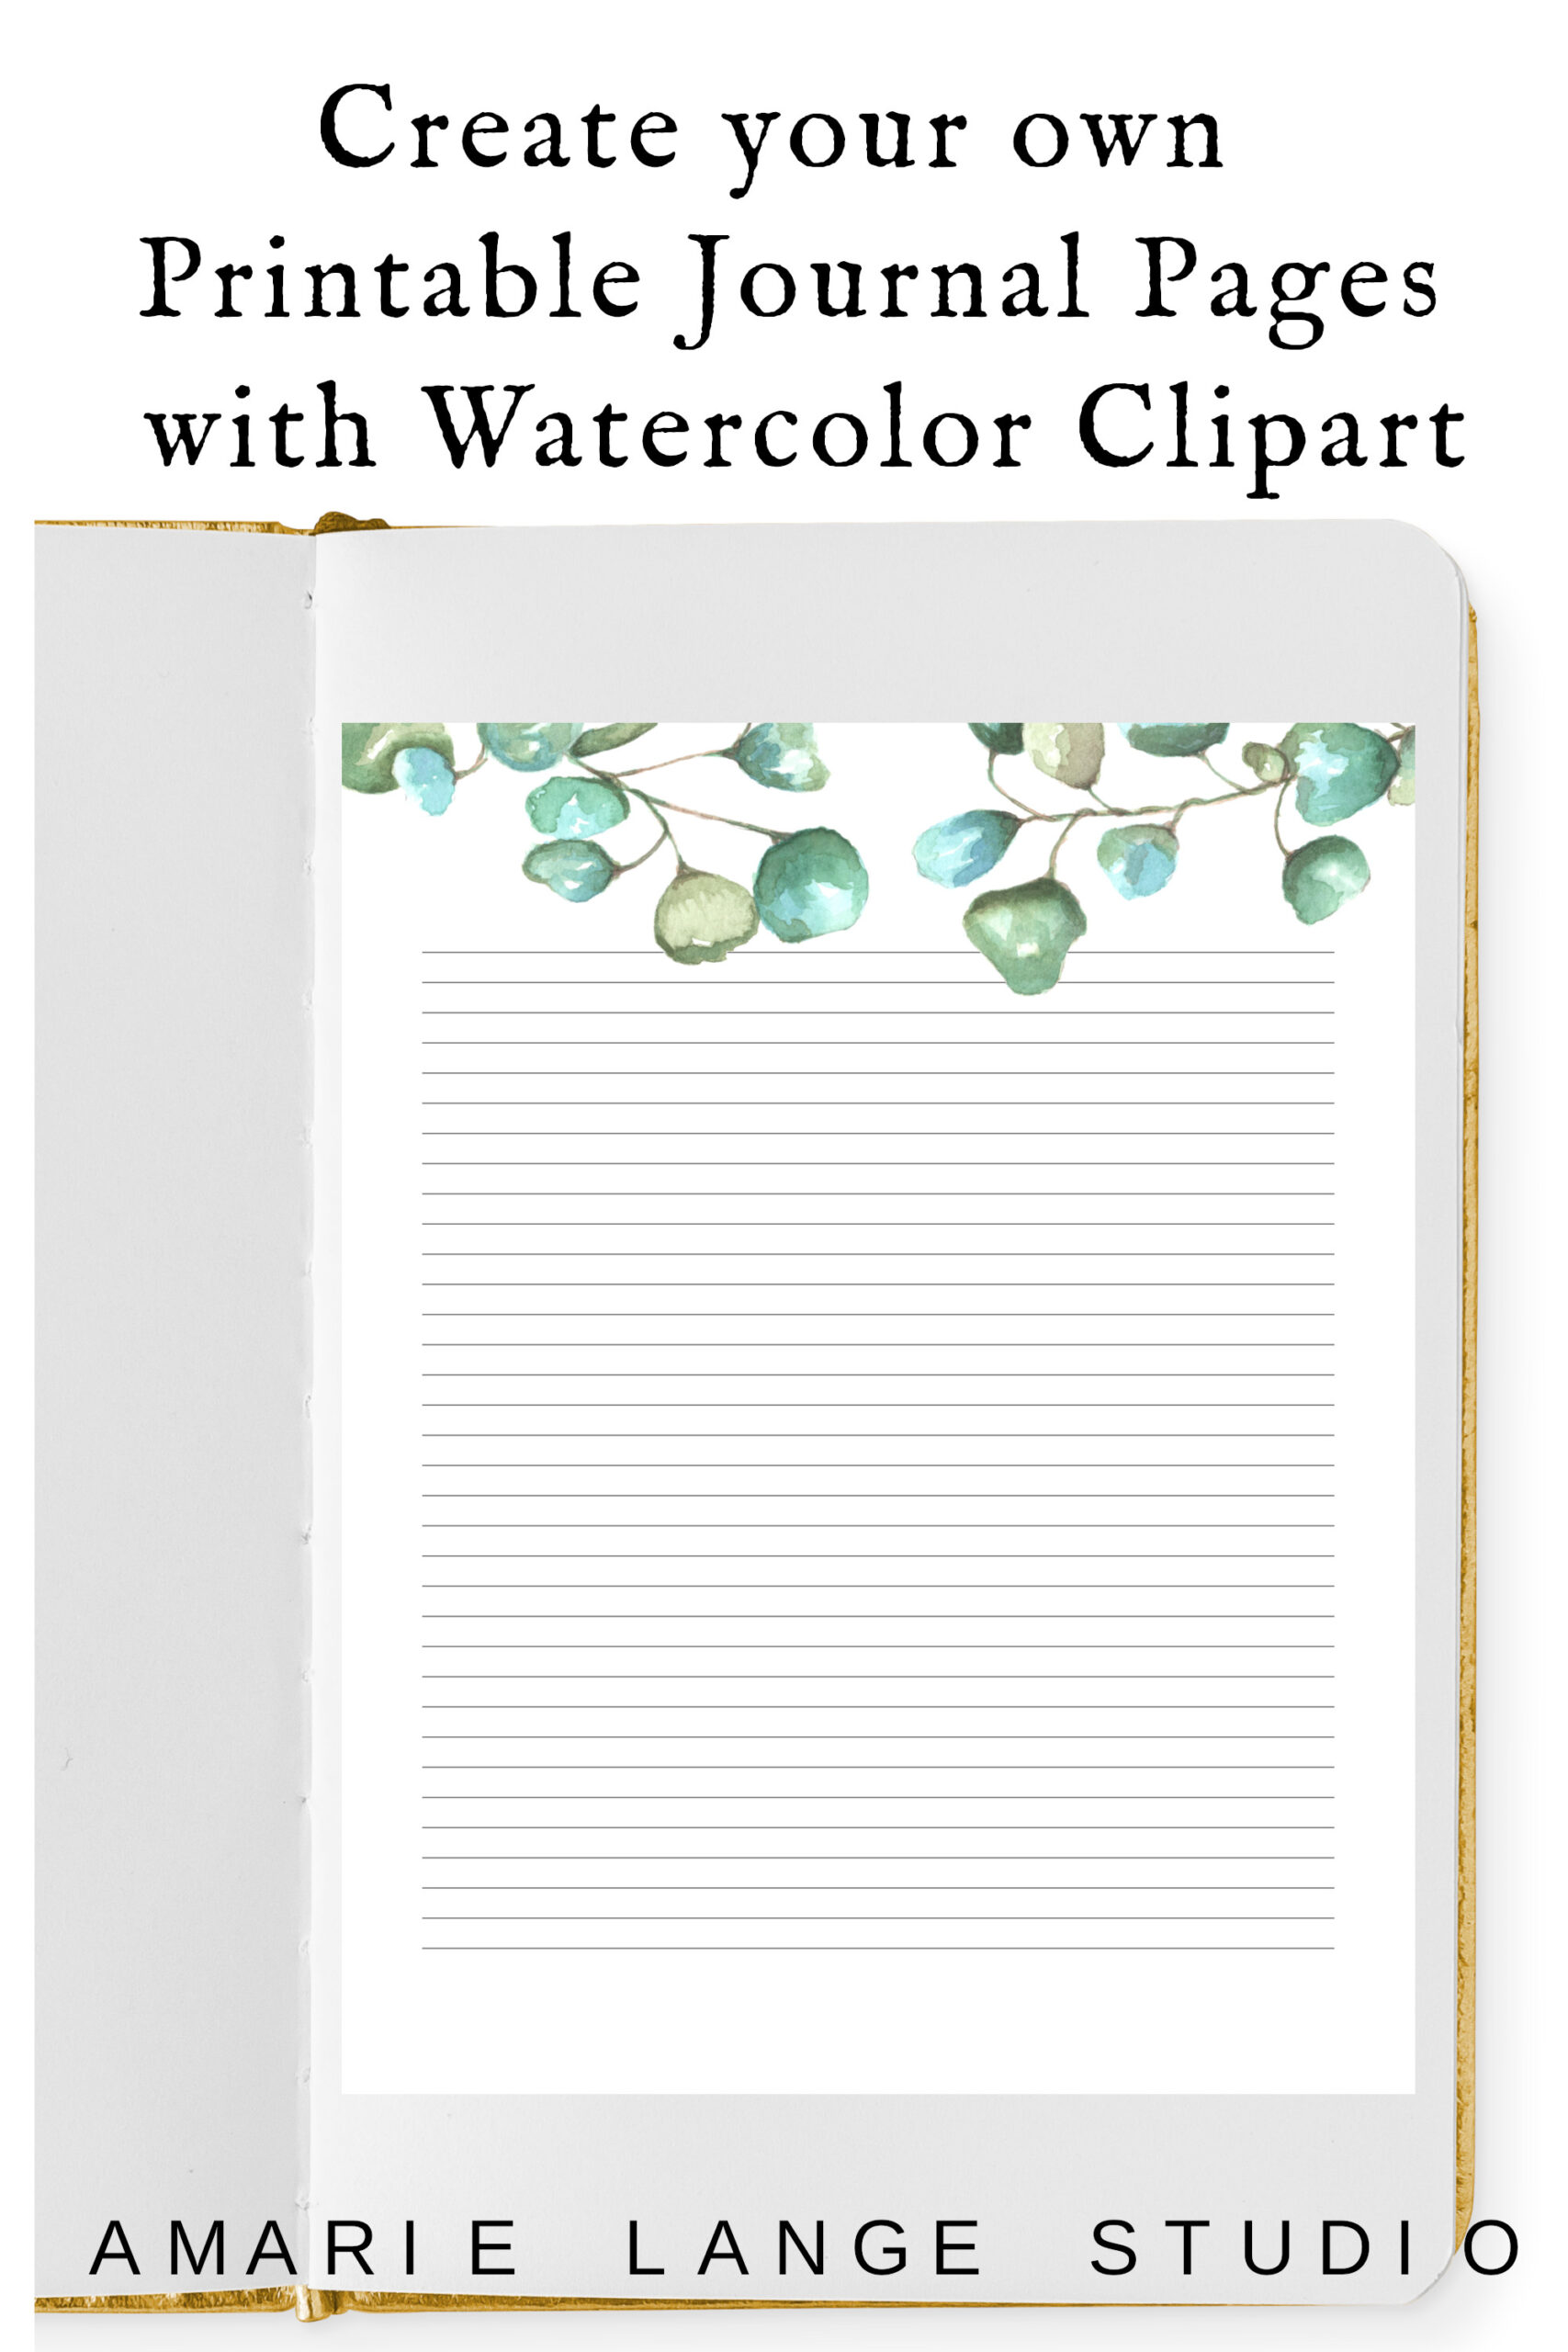 How to Use Watercolor Clipart to Make Printable Journal Pages